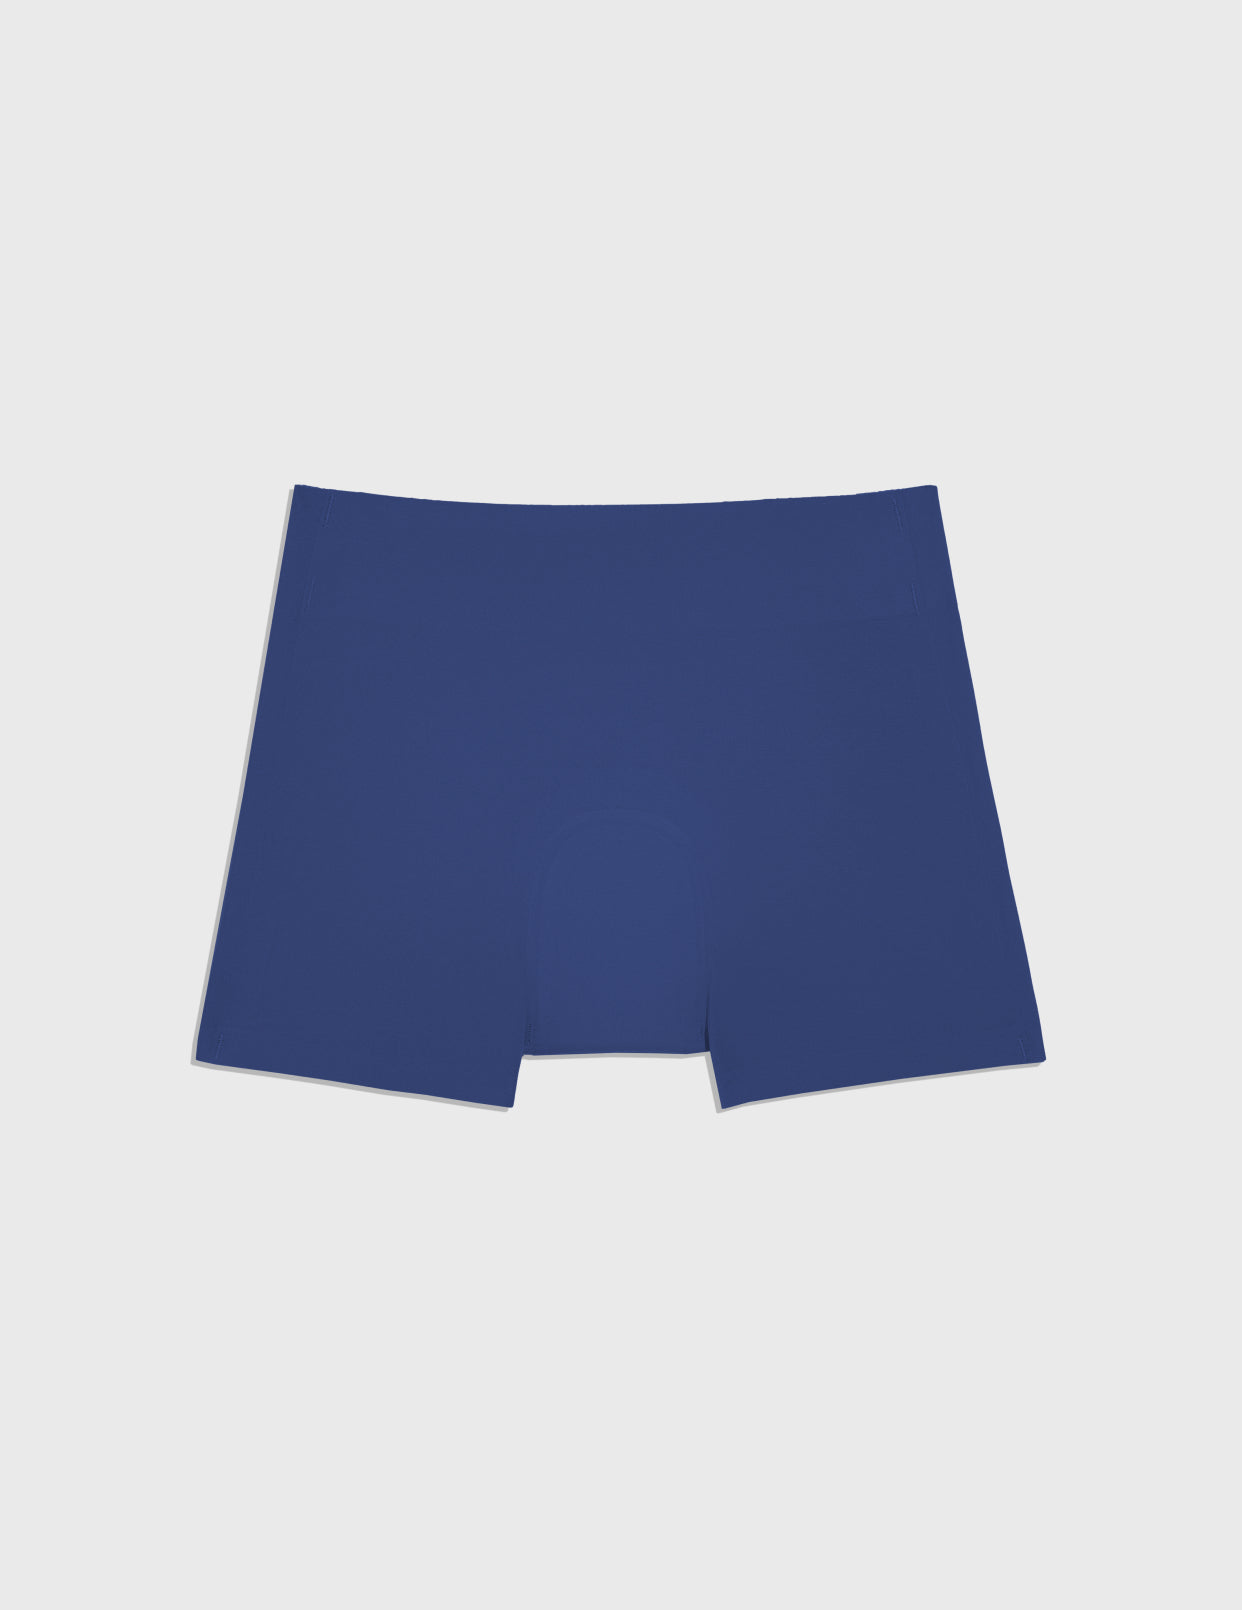 Kt by Knix: Save on Sleepover Shorts